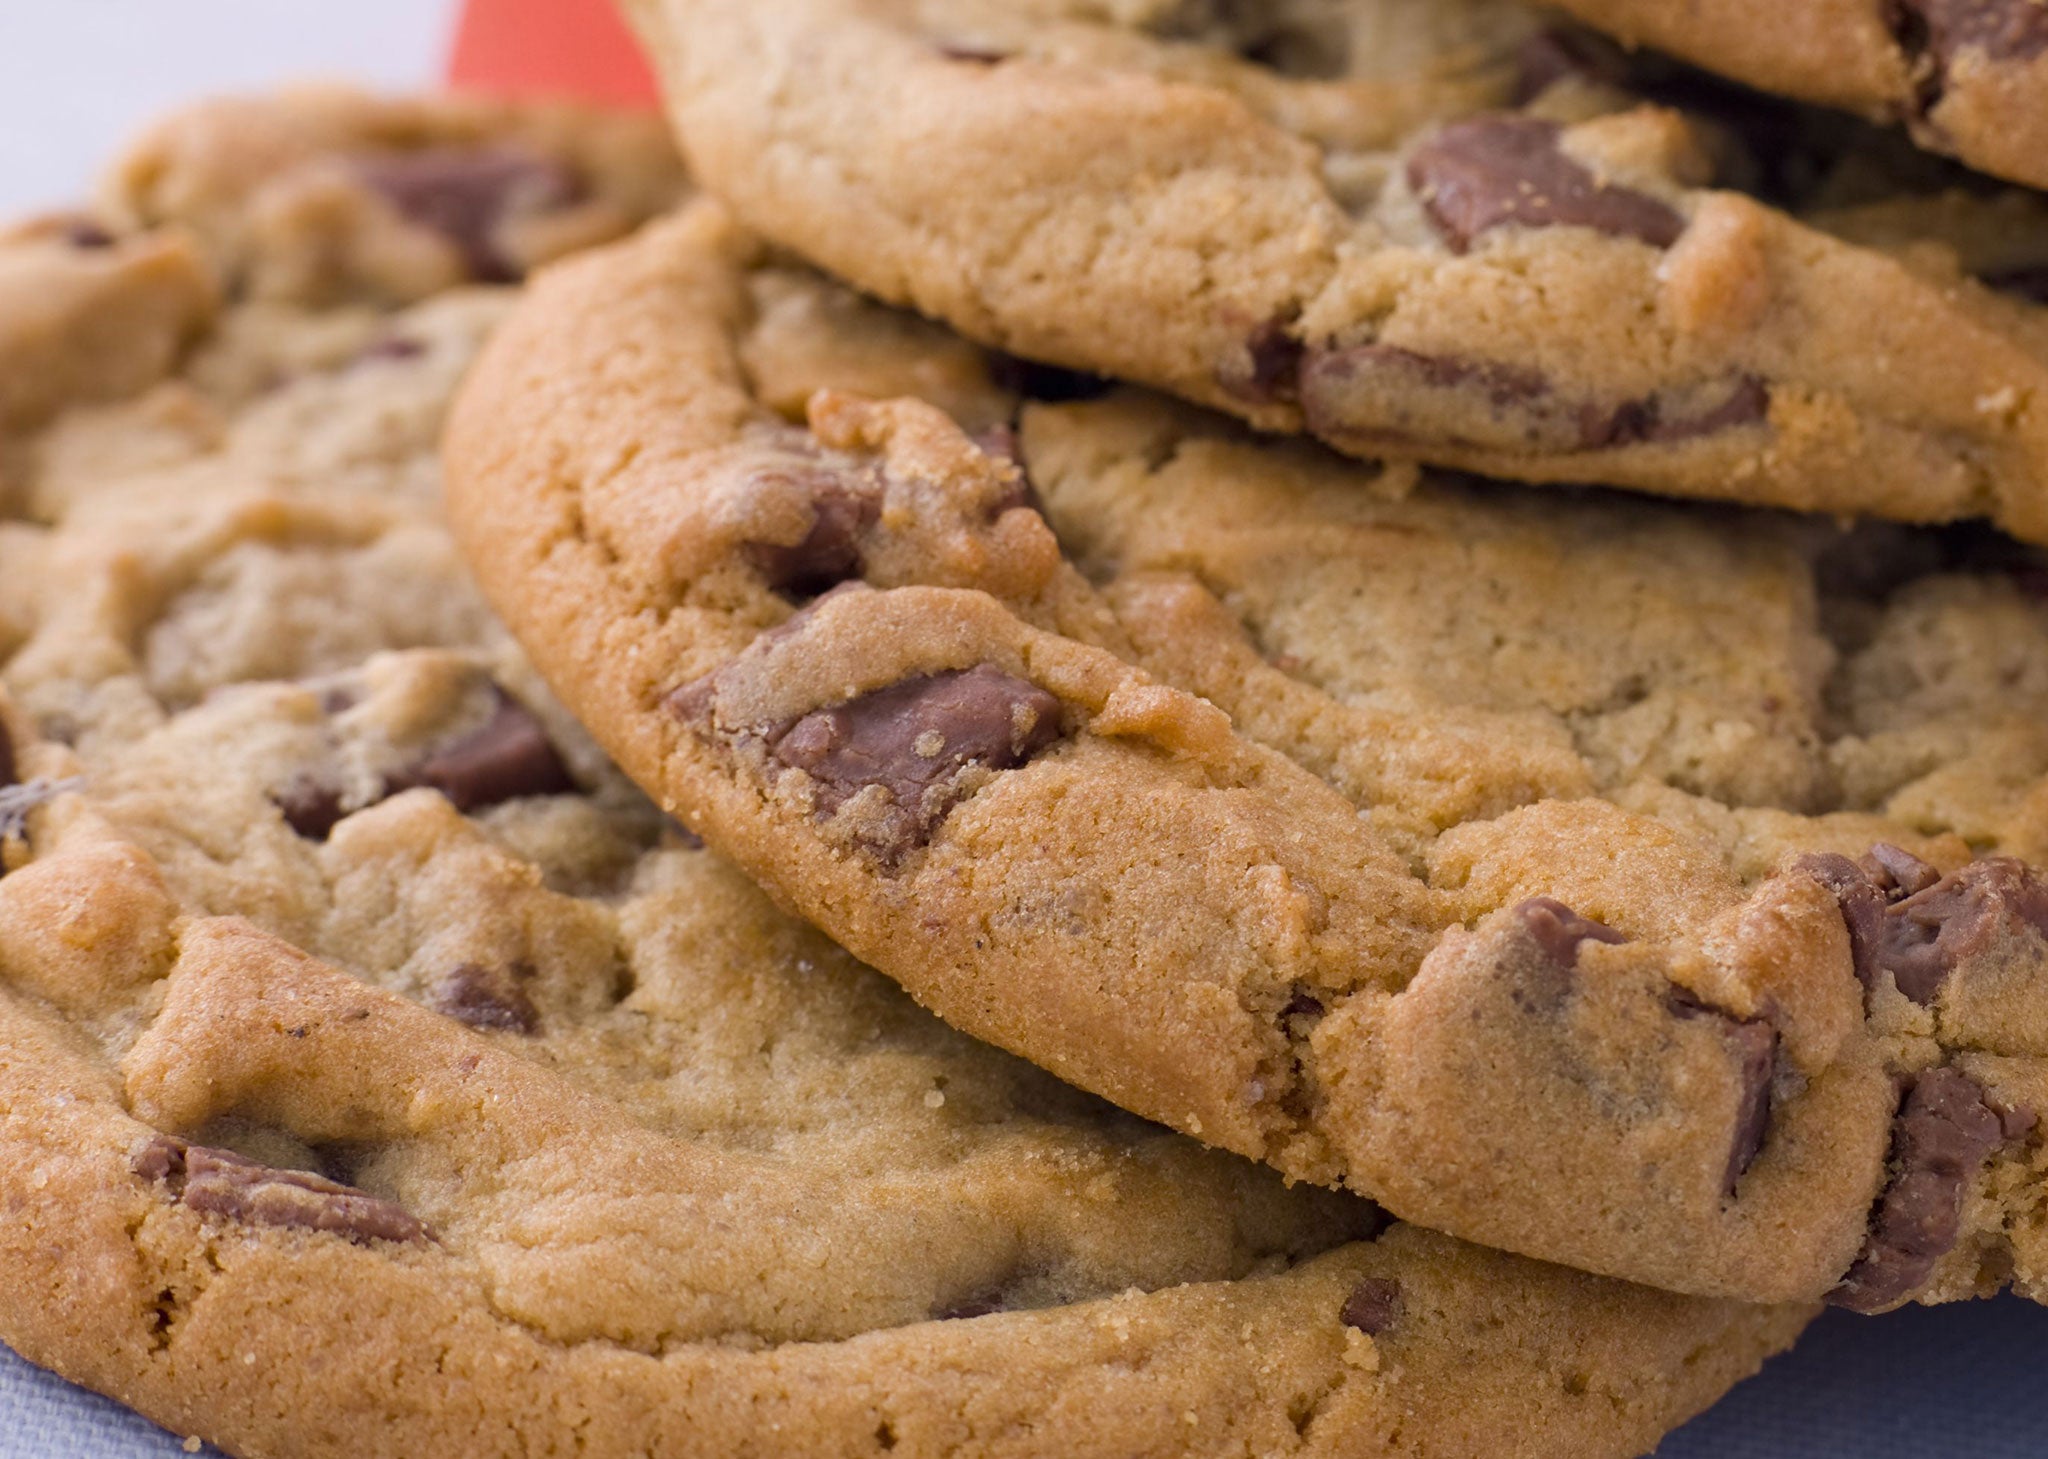 Those from lower socioeconomic backgrounds ate the cookies regardless of whether they were hungry